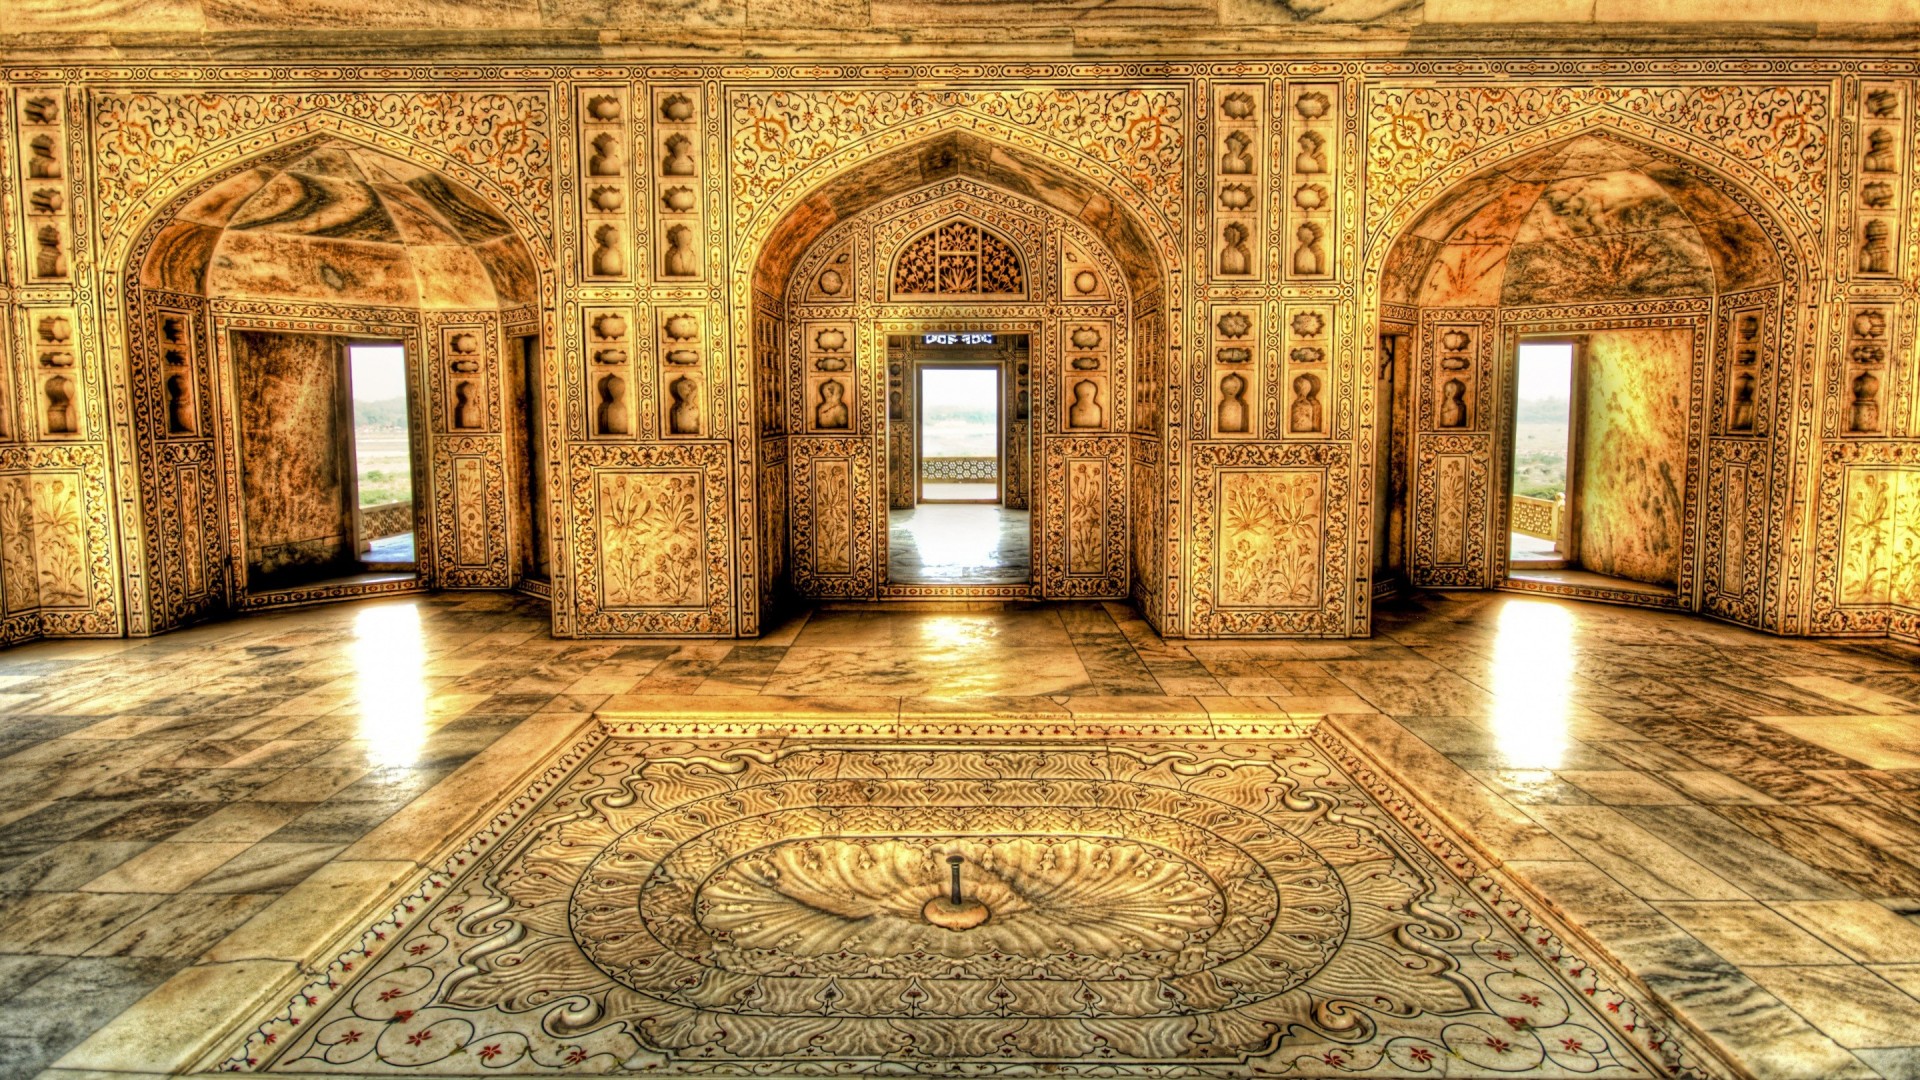 3d wallpaper for walls india,holy places,floor,architecture,flooring,arch